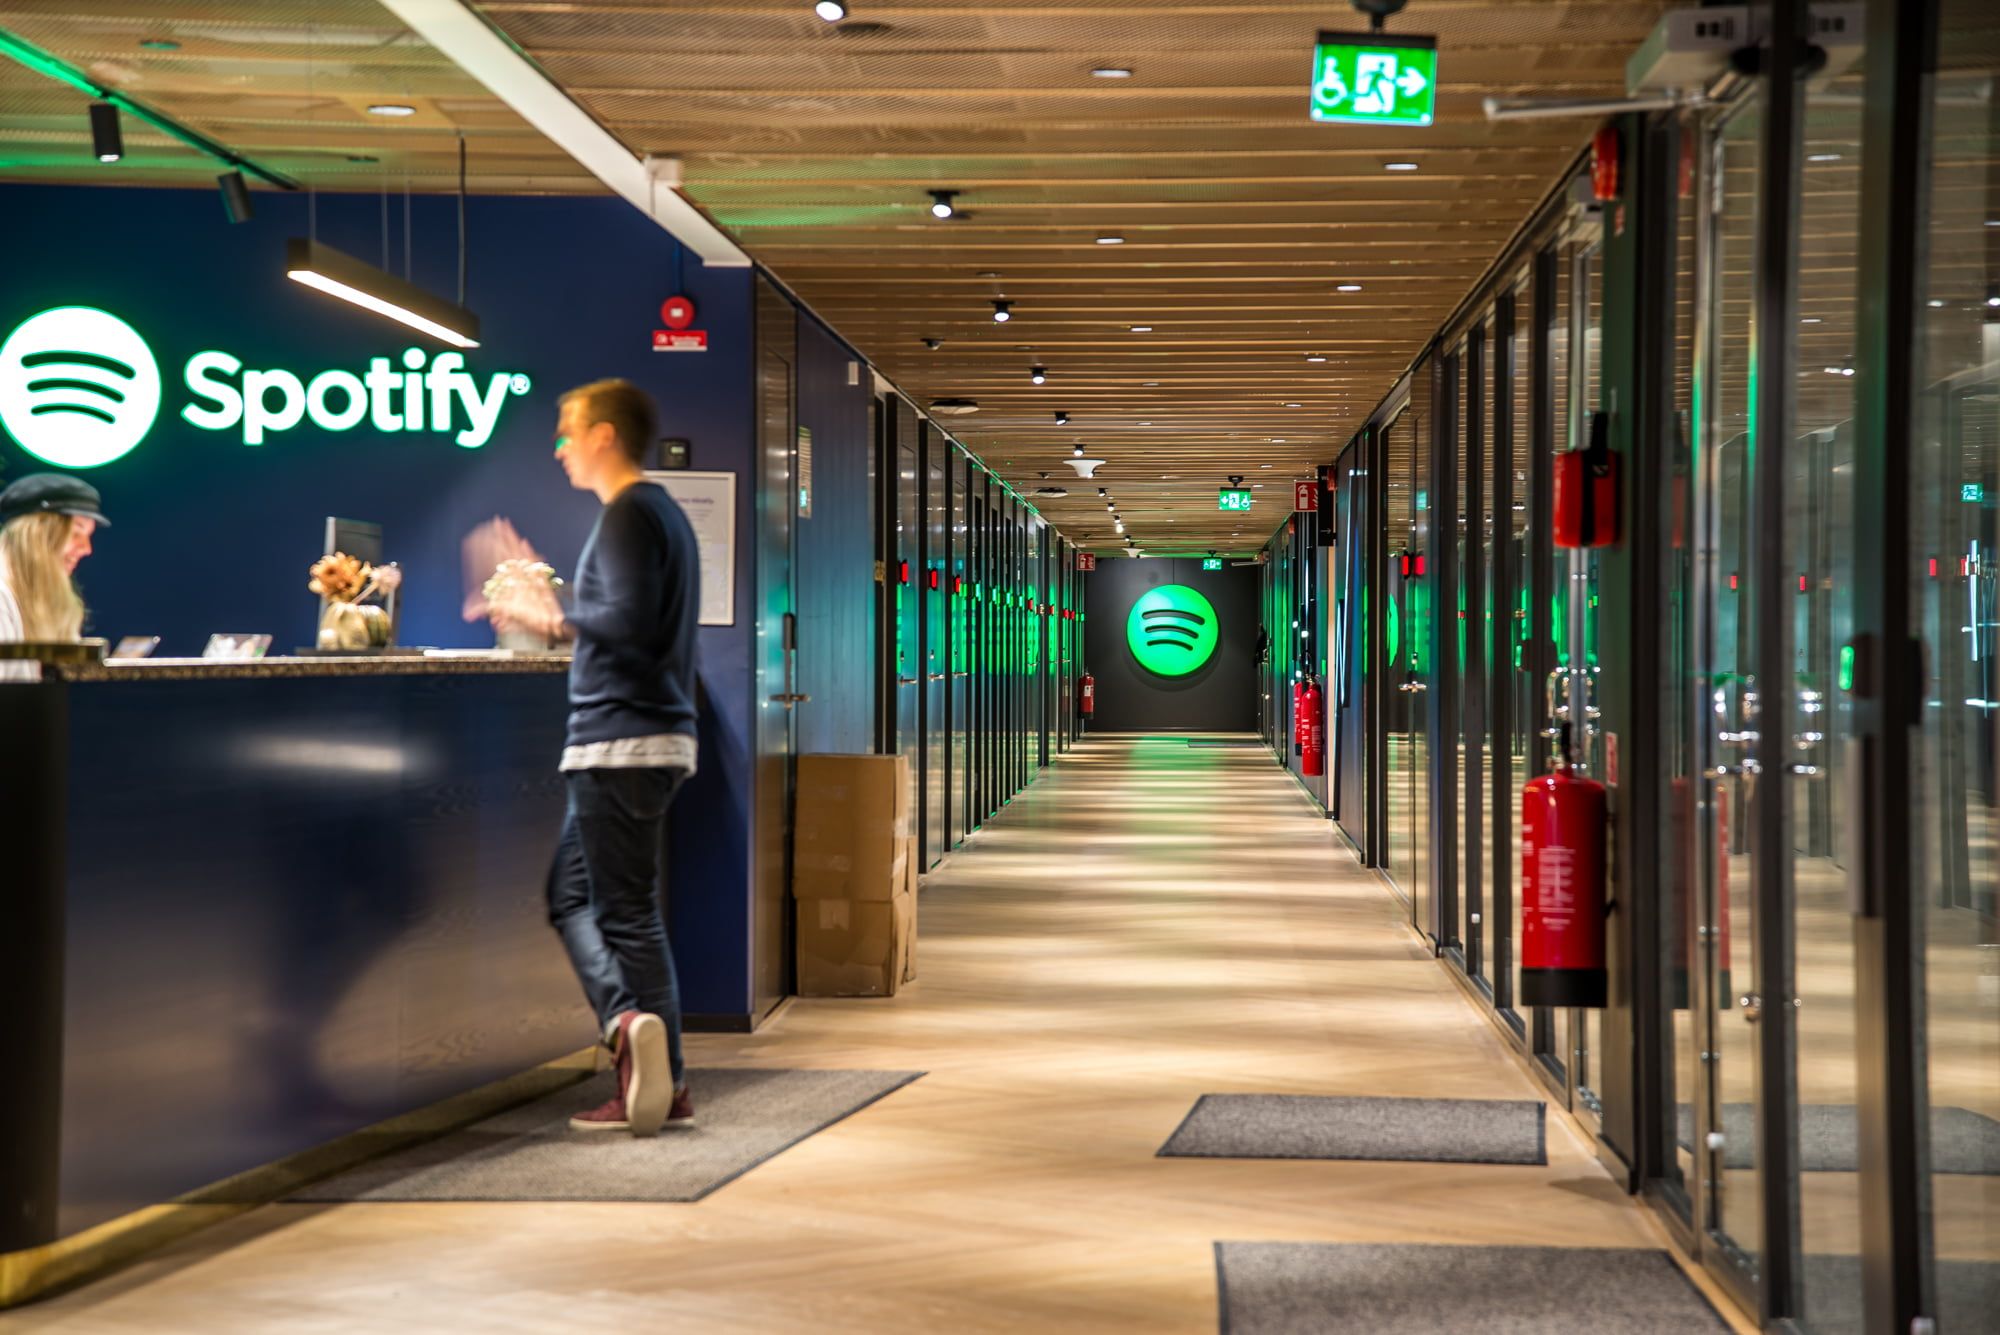 You will be able to log in to Spotify with your Google account